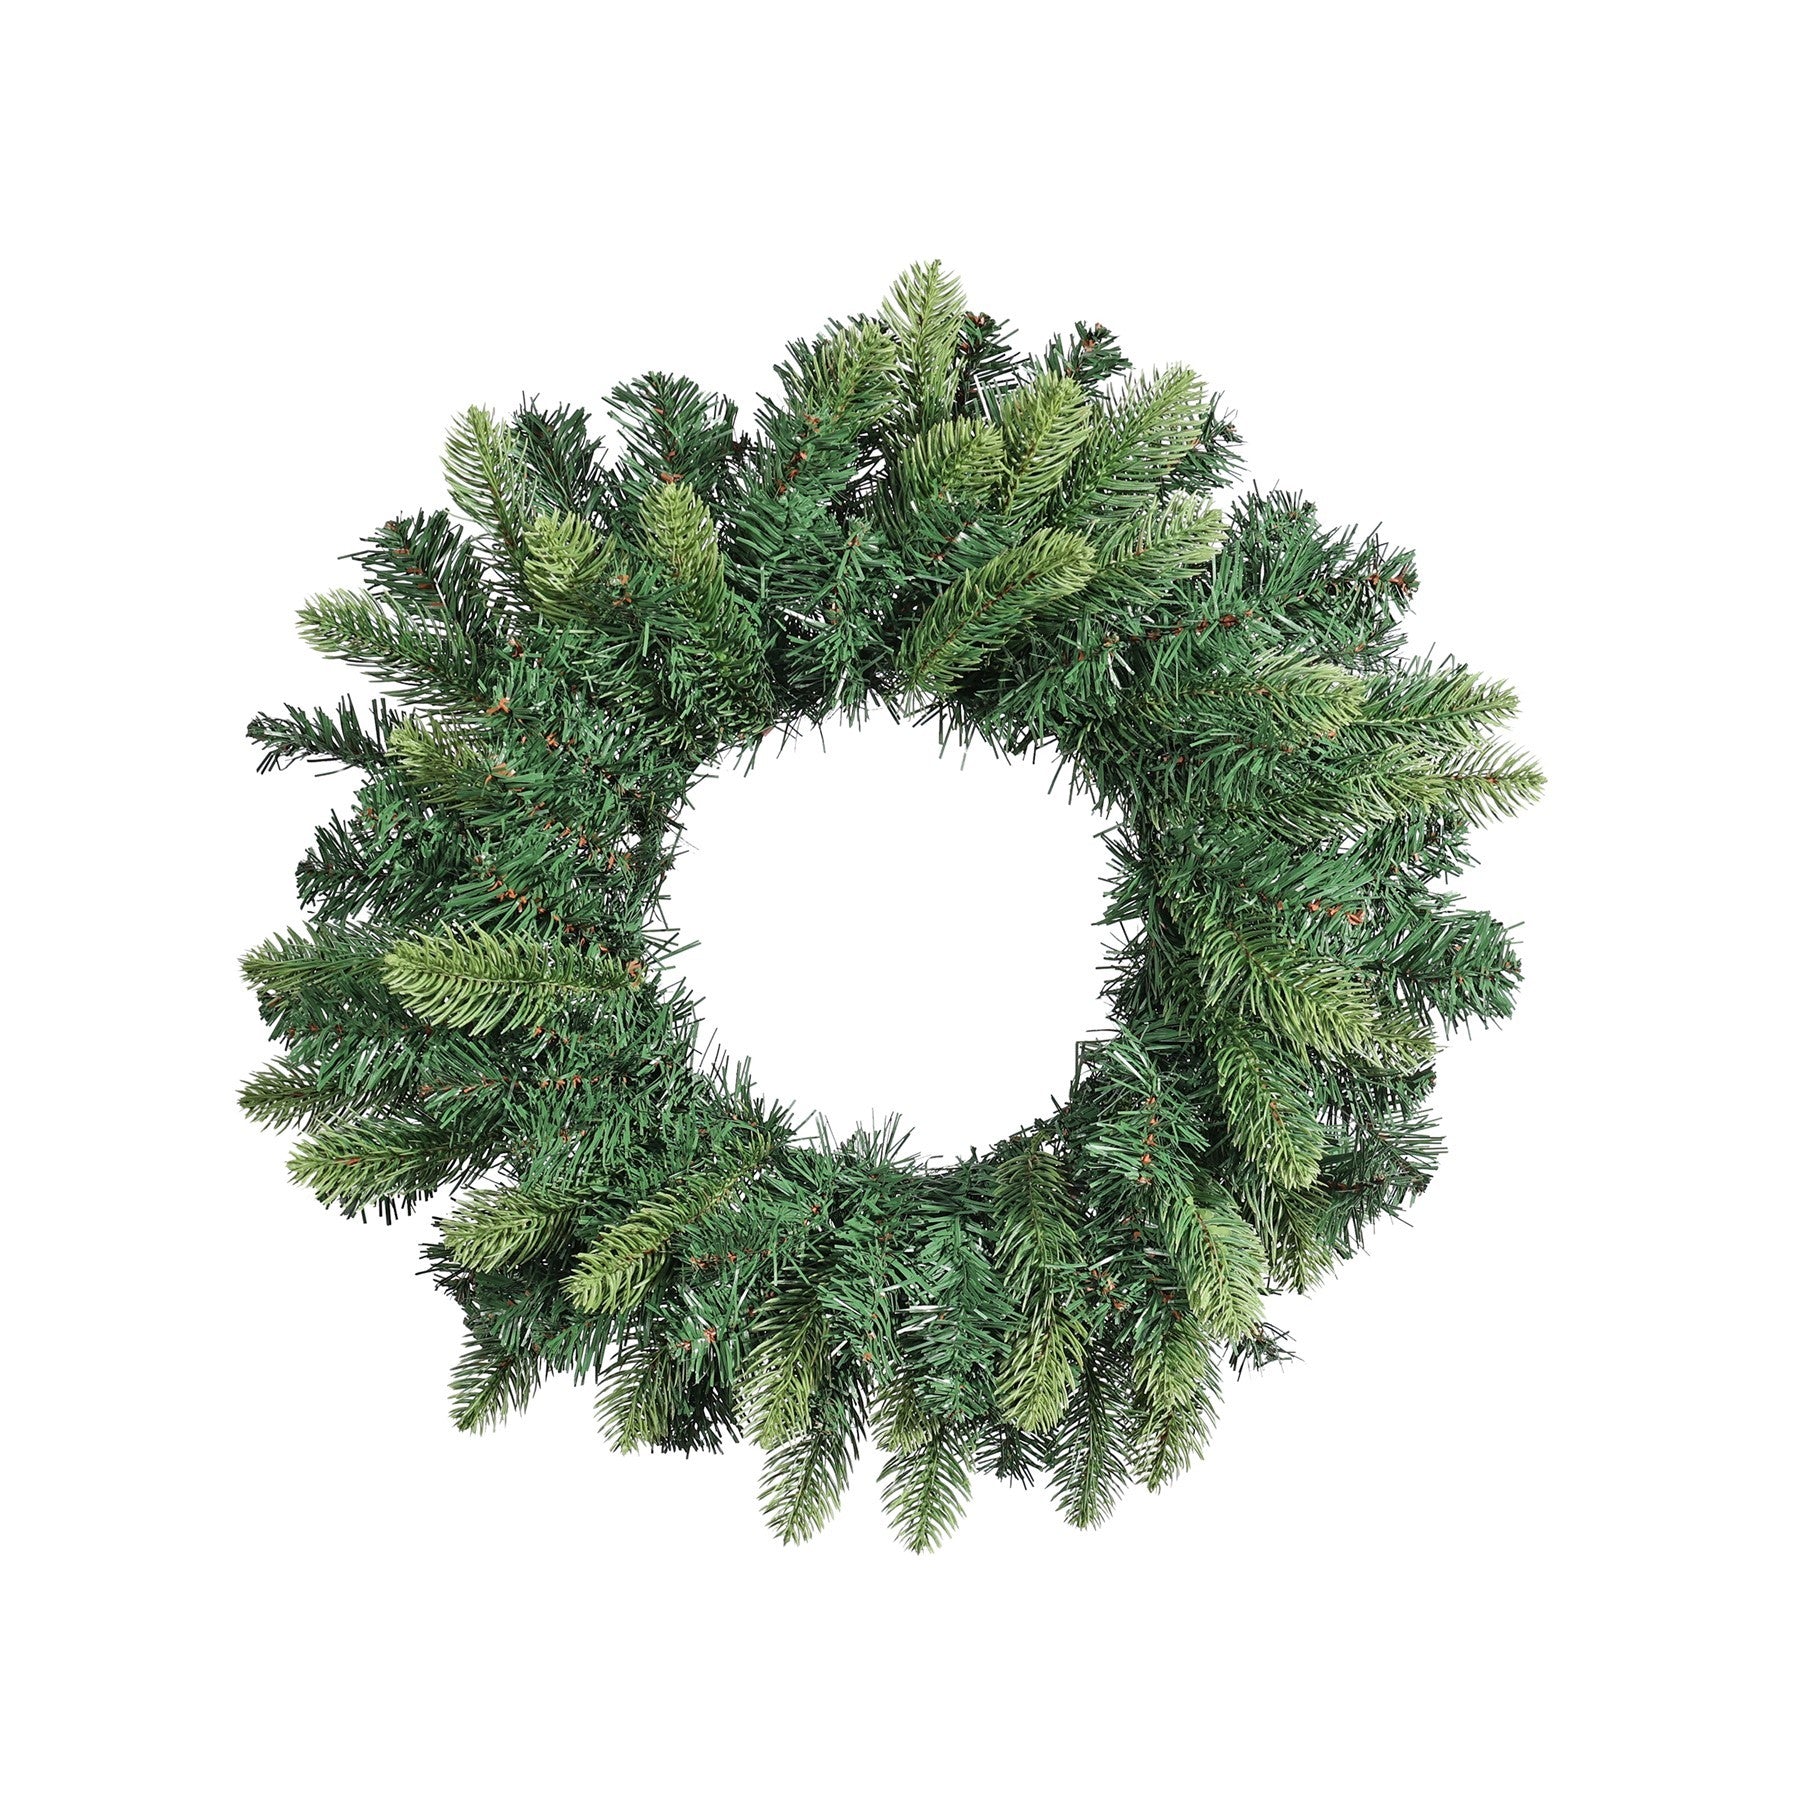 View 50cm Spruce Wreath 120 tips information